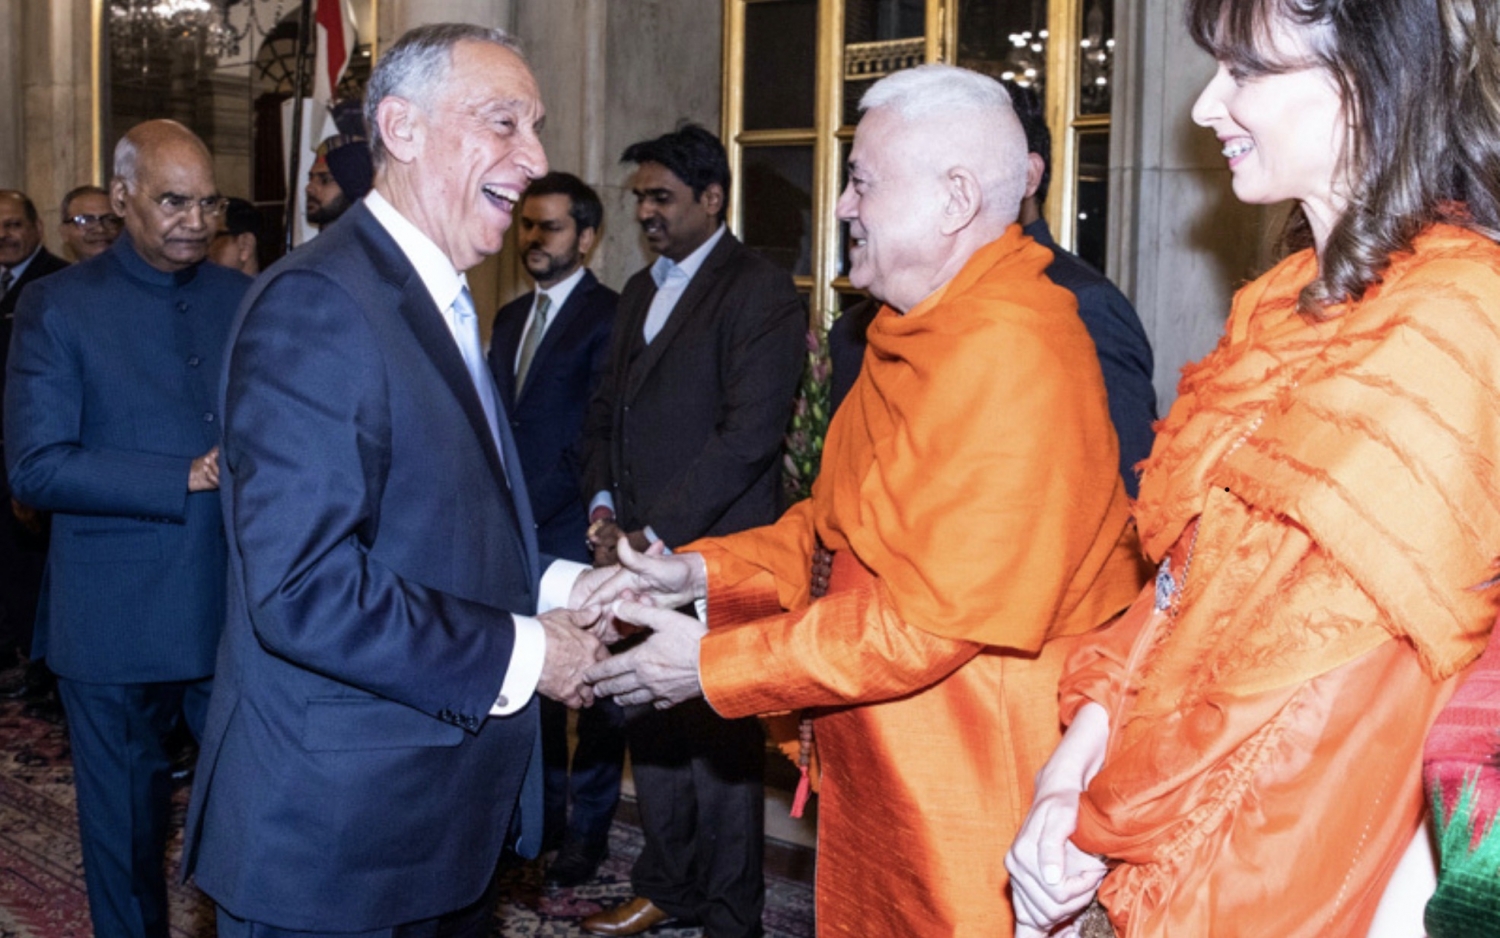 State Visit of the President of the Portuguese Republic to India - 2020, February